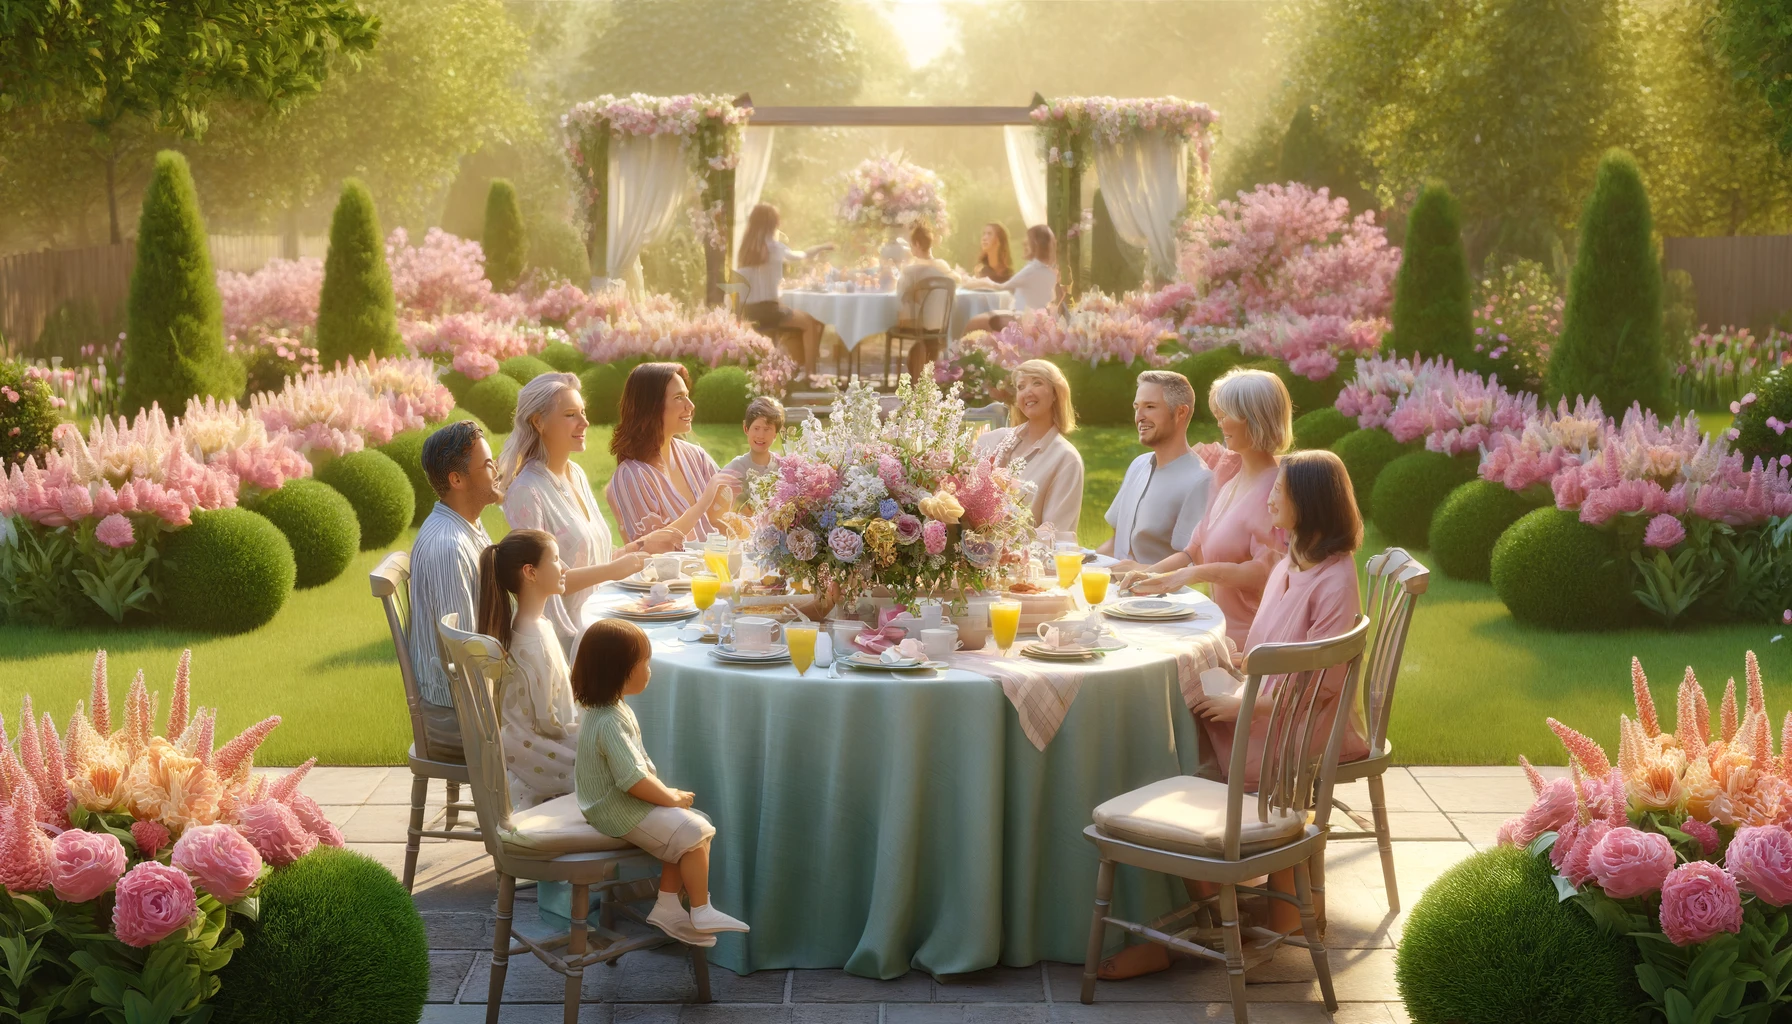 "Creating a Beautiful Photo Backdrop for Your Mother's Day Brunch Event"